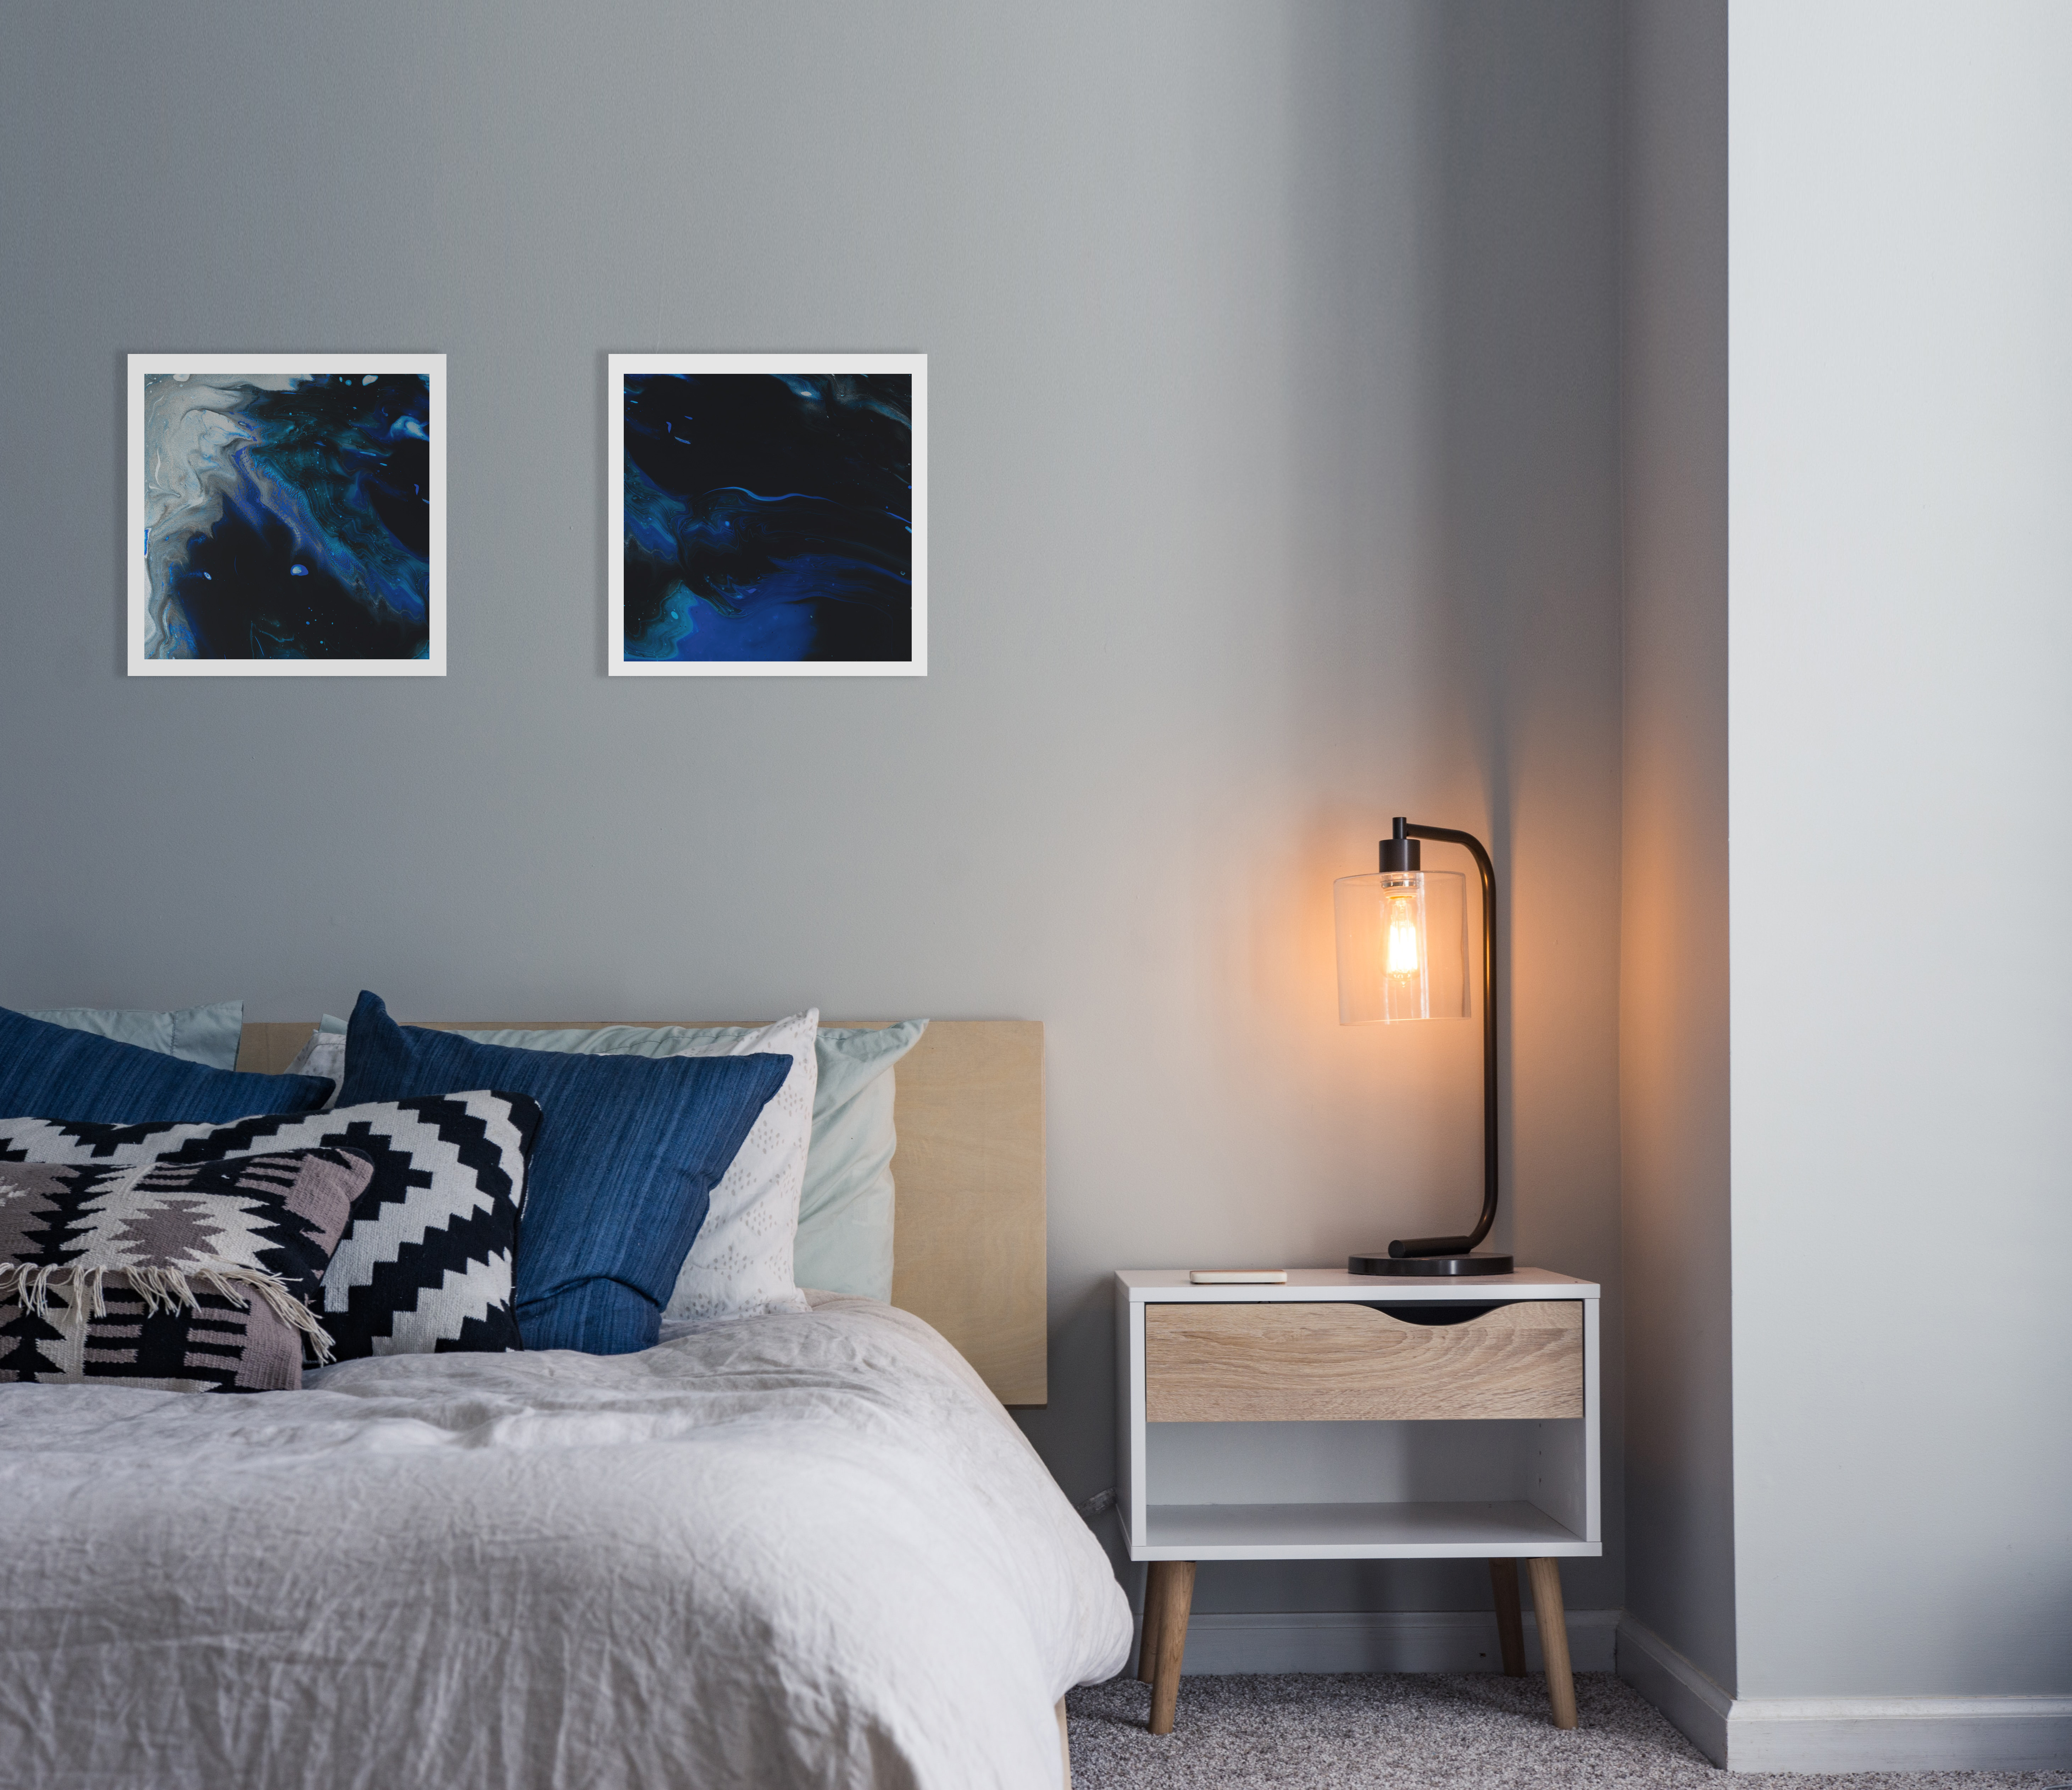 Create your own custom framed photo prints using your favourite photos and choose from our great range of frame styles to match your home decor perfectly and add the finishing touches to your walls.